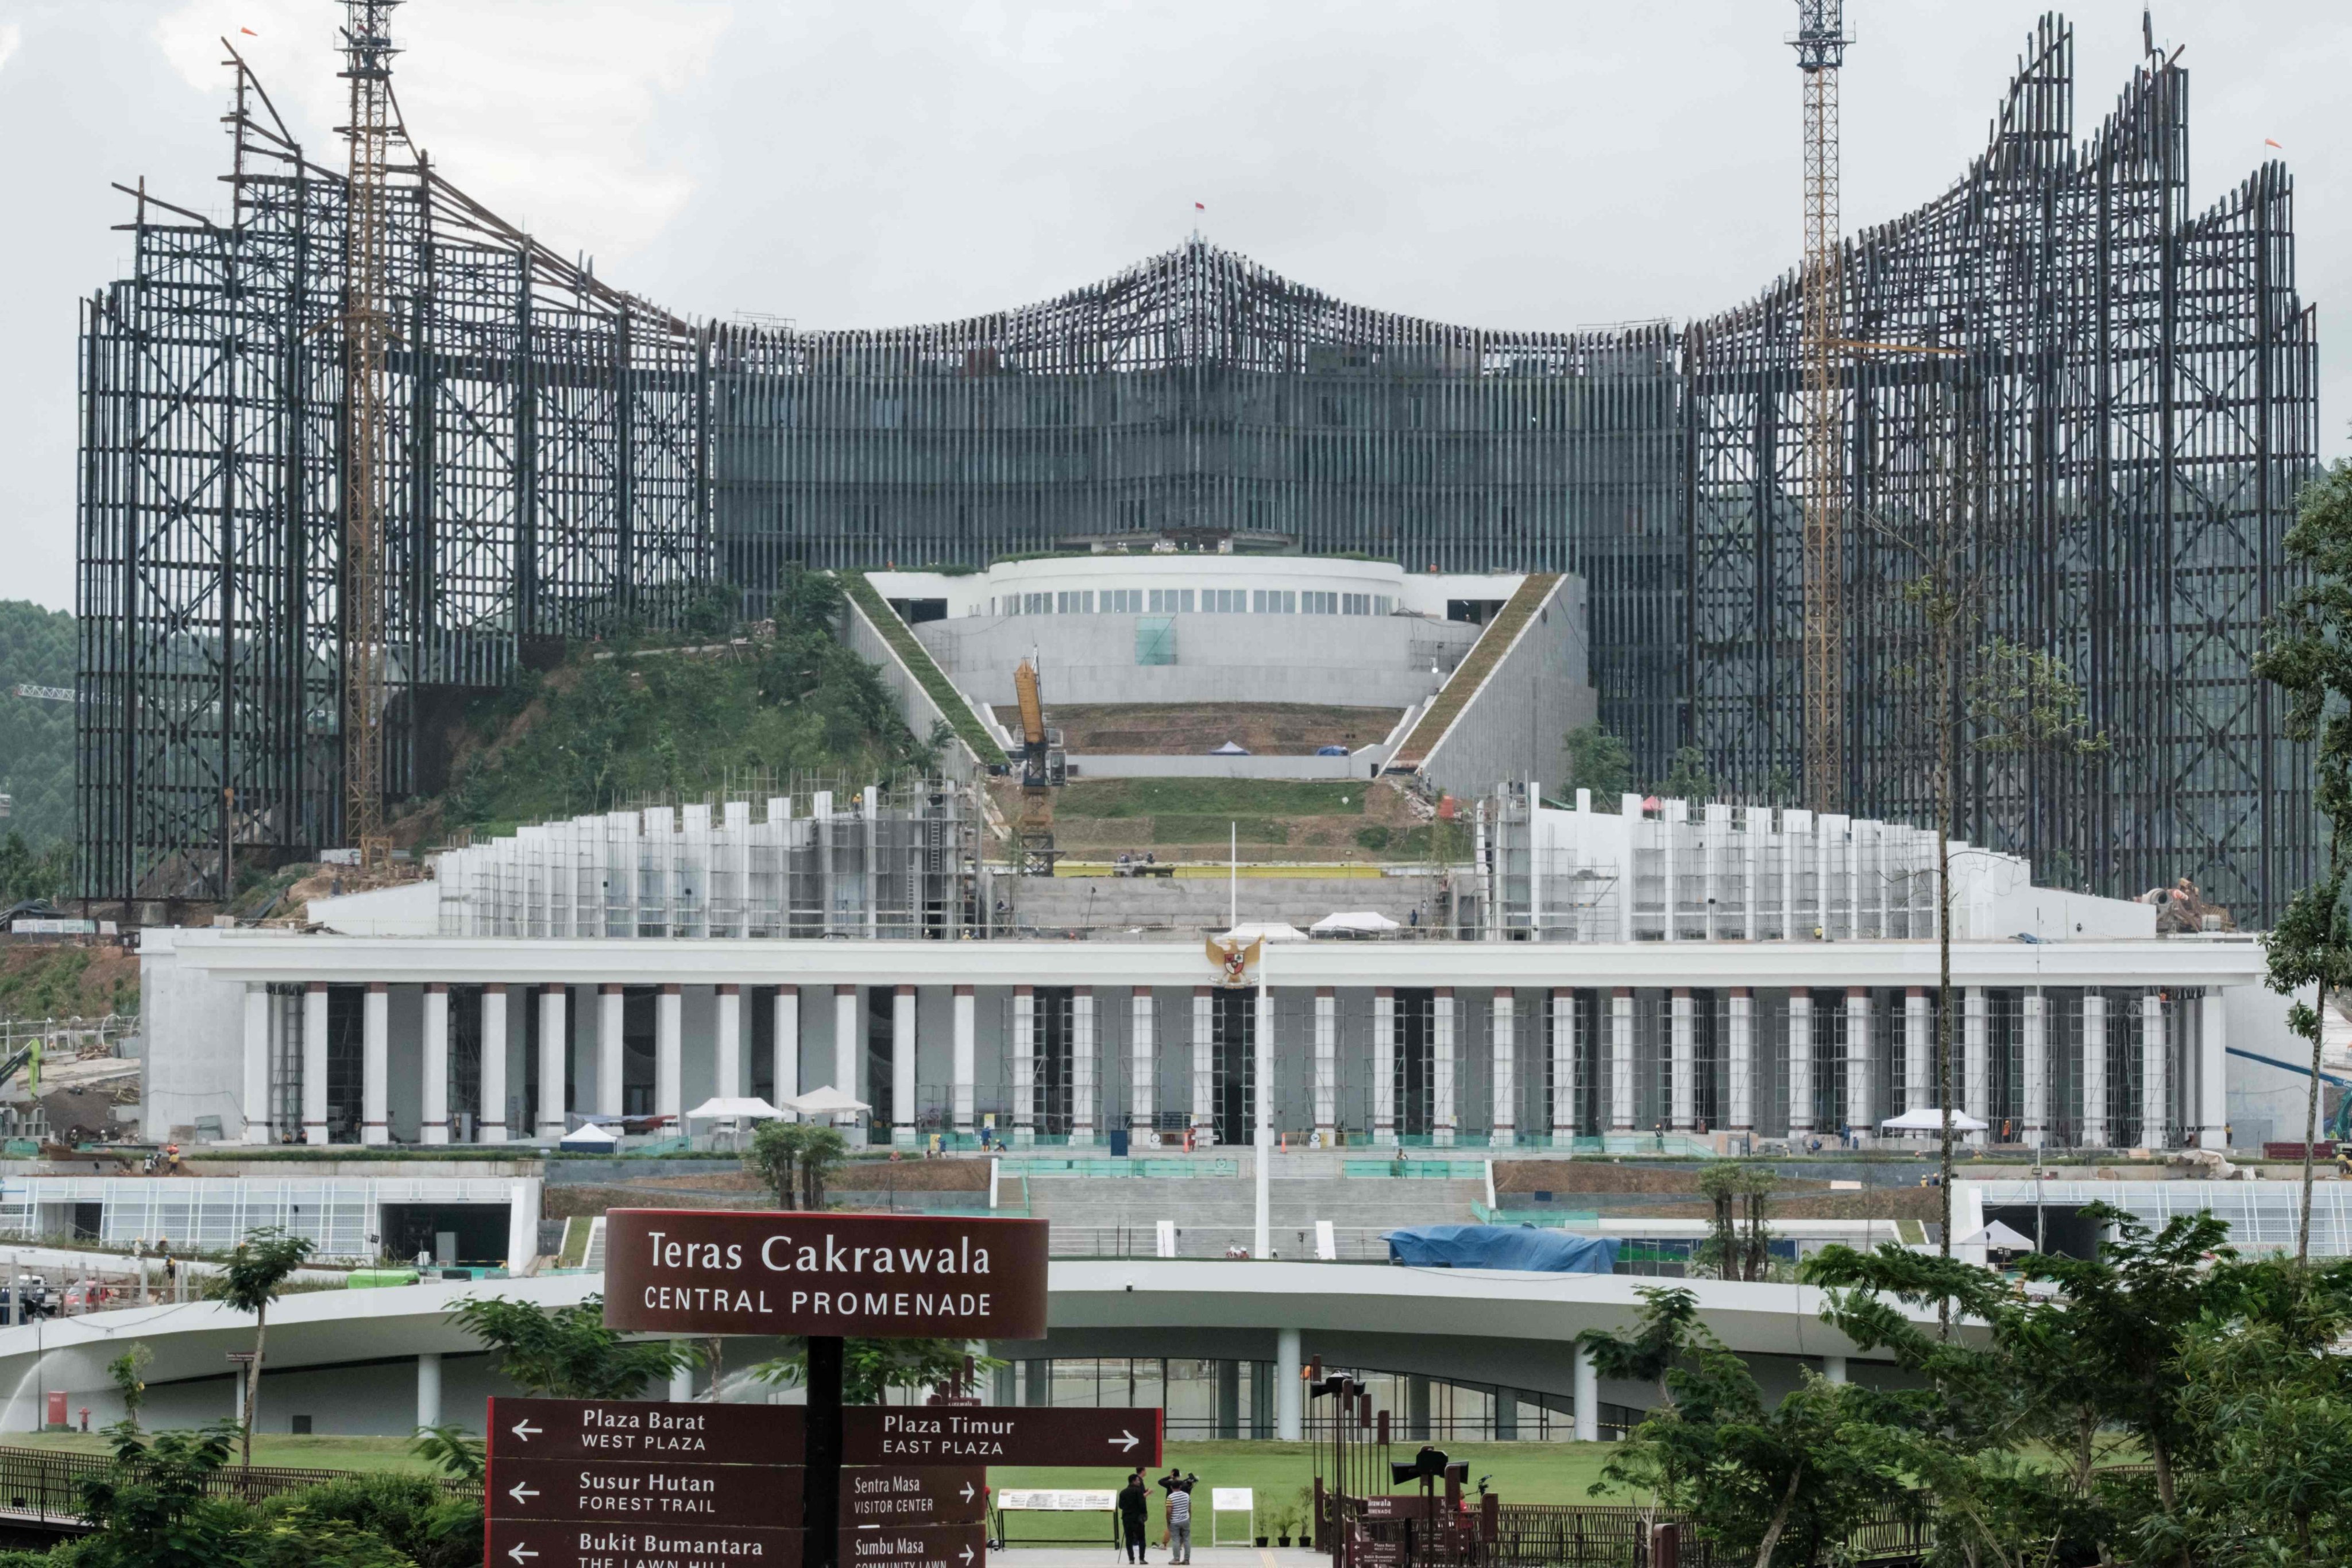 Nusantara, Indonesia’s new US$32 billion capital city, is being built in the jungles of Borneo island. Photo: AFP